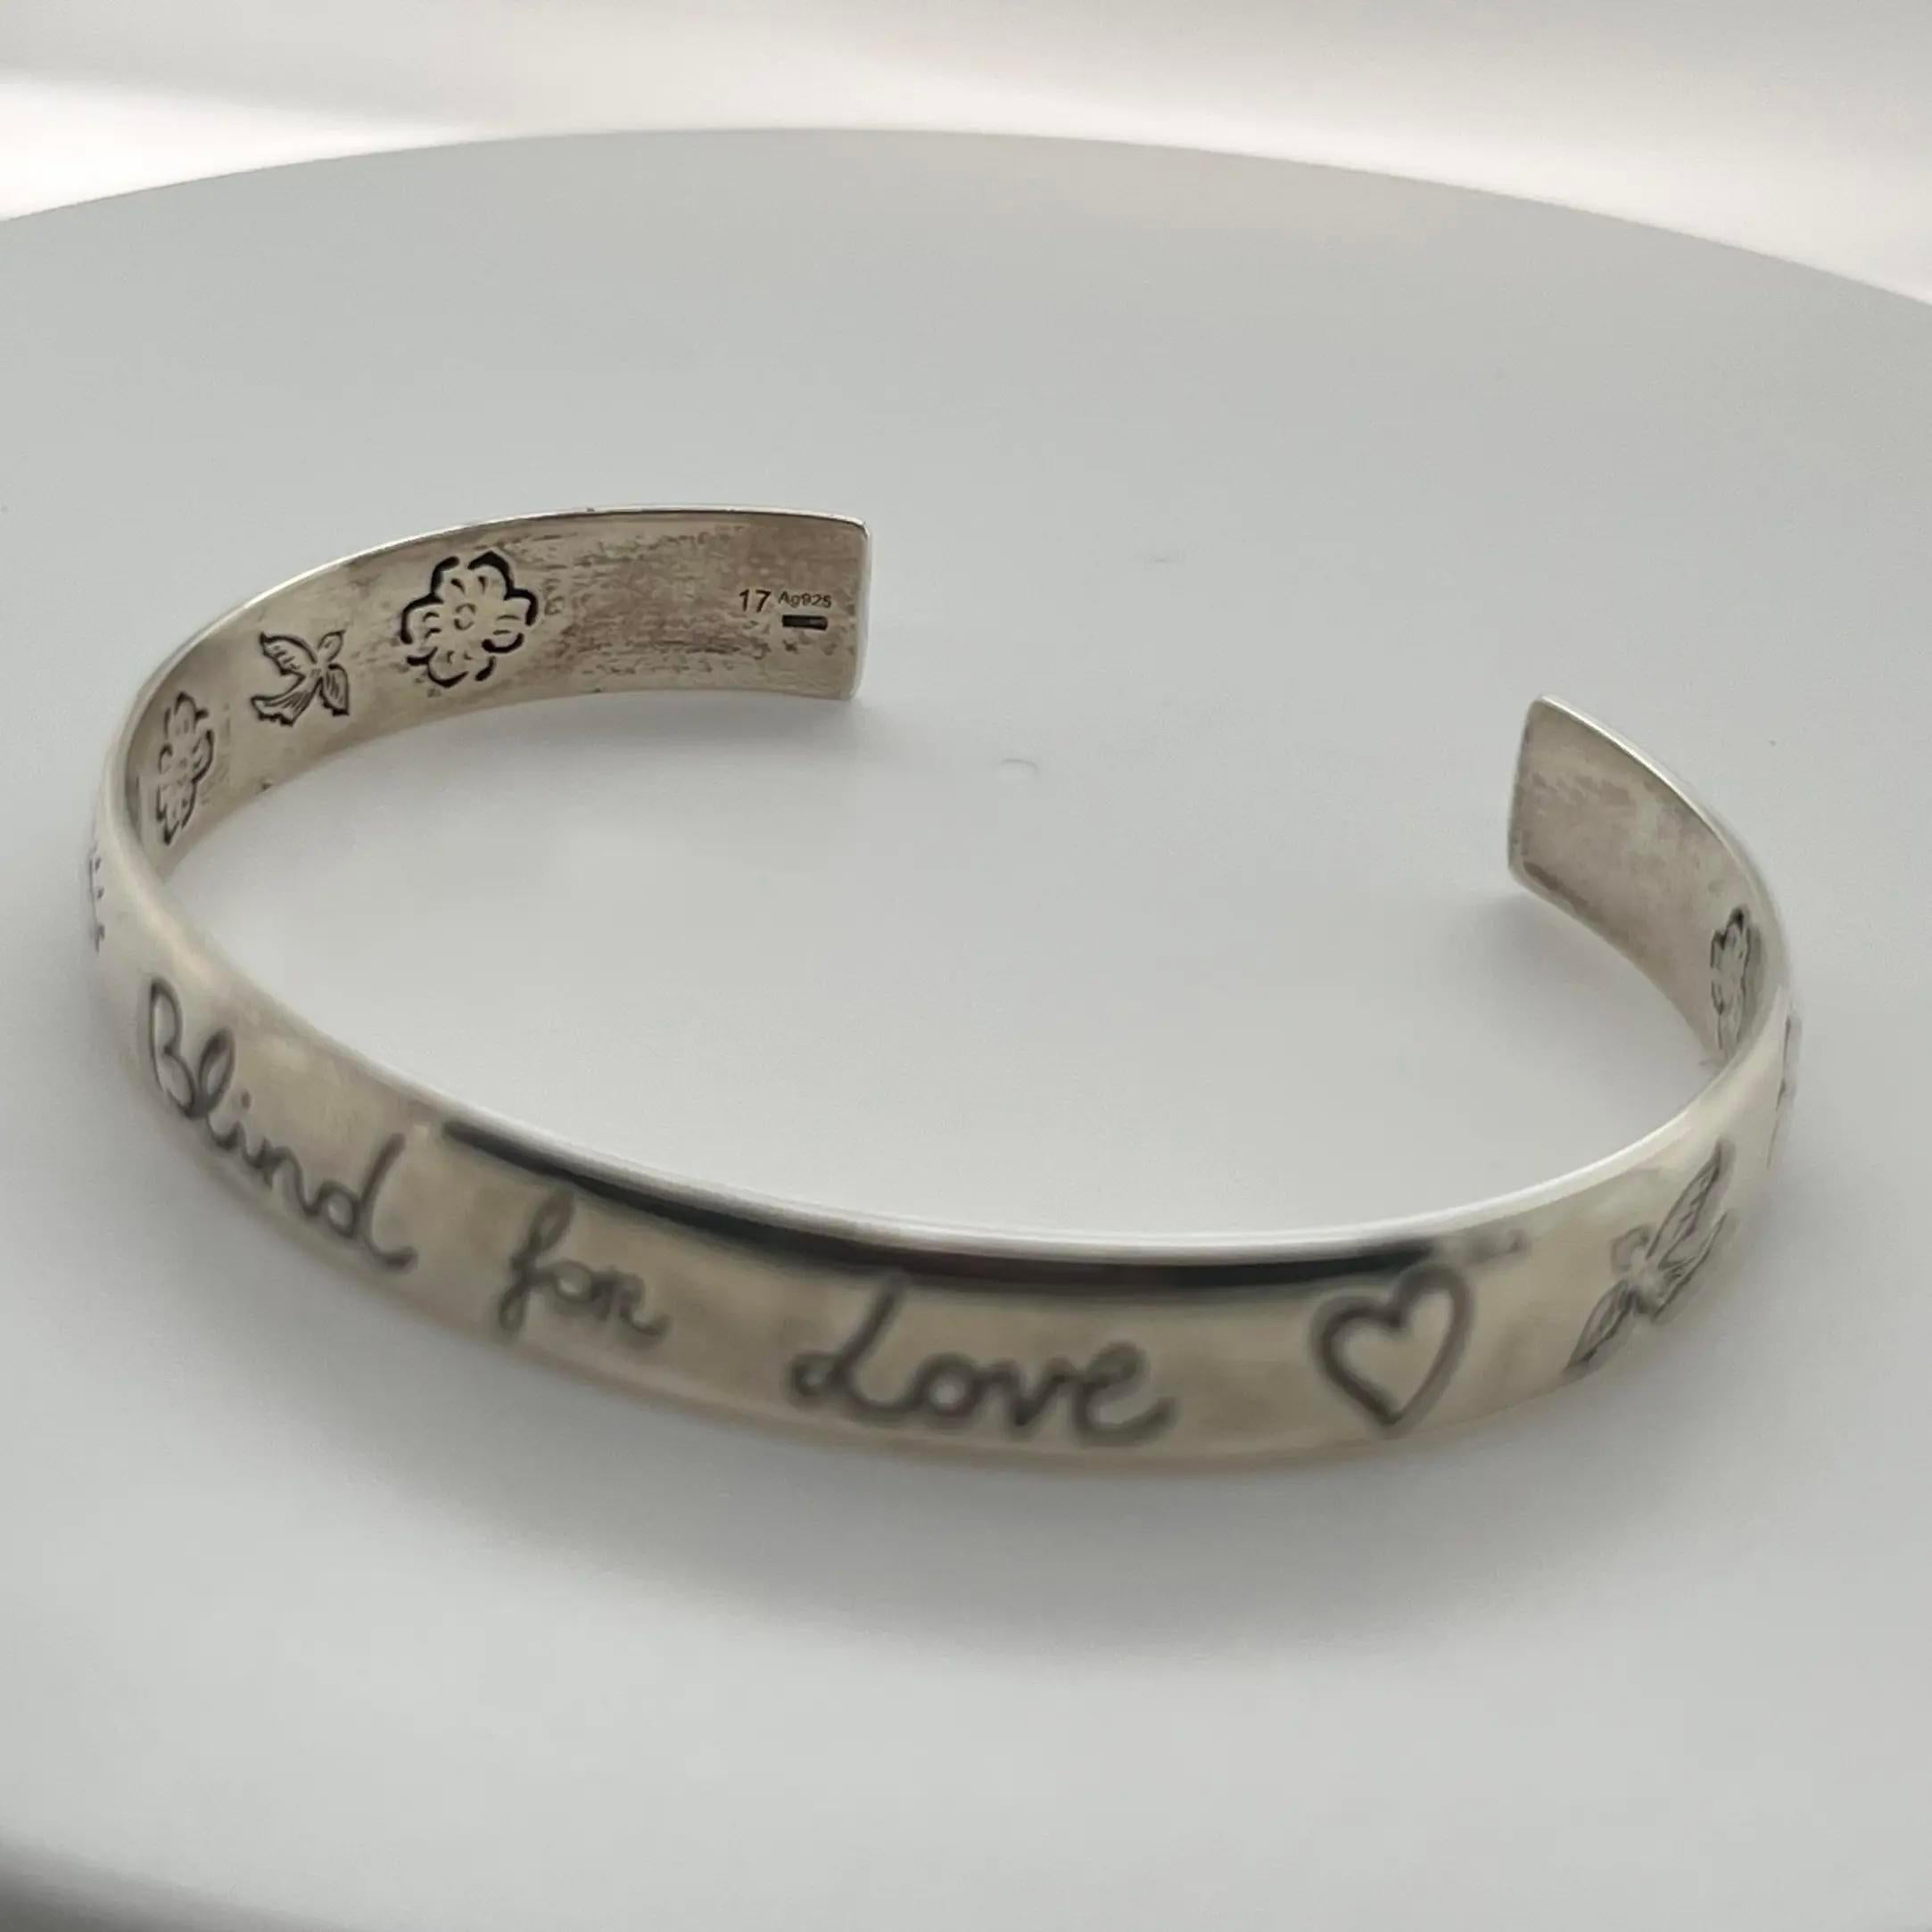 This cuff bracelet is designed in 925 sterling silver featuring engraved symbolic Gucci motifs, including the eye, hearts, birds, flowers, and the phrase 